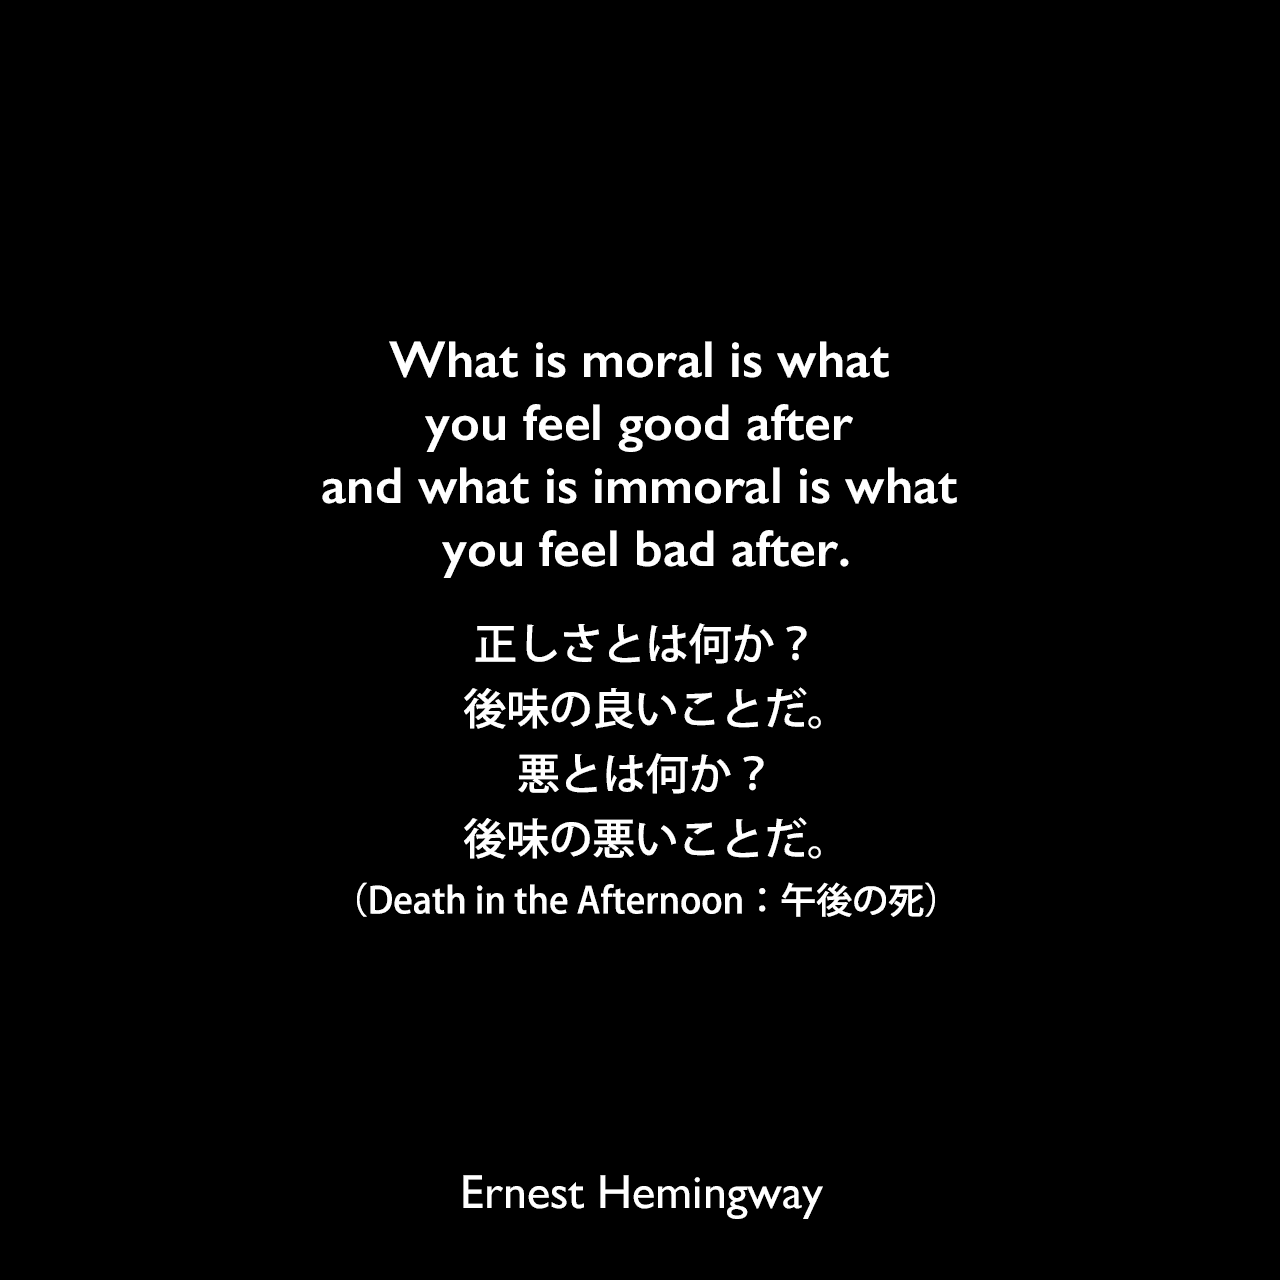 What is moral is what you feel good after and what is immoral is what you feel bad after.正しさとは何か？後味の良いことだ。悪とは何か？後味の悪いことだ。（Death in the Afternoon：午後の死）